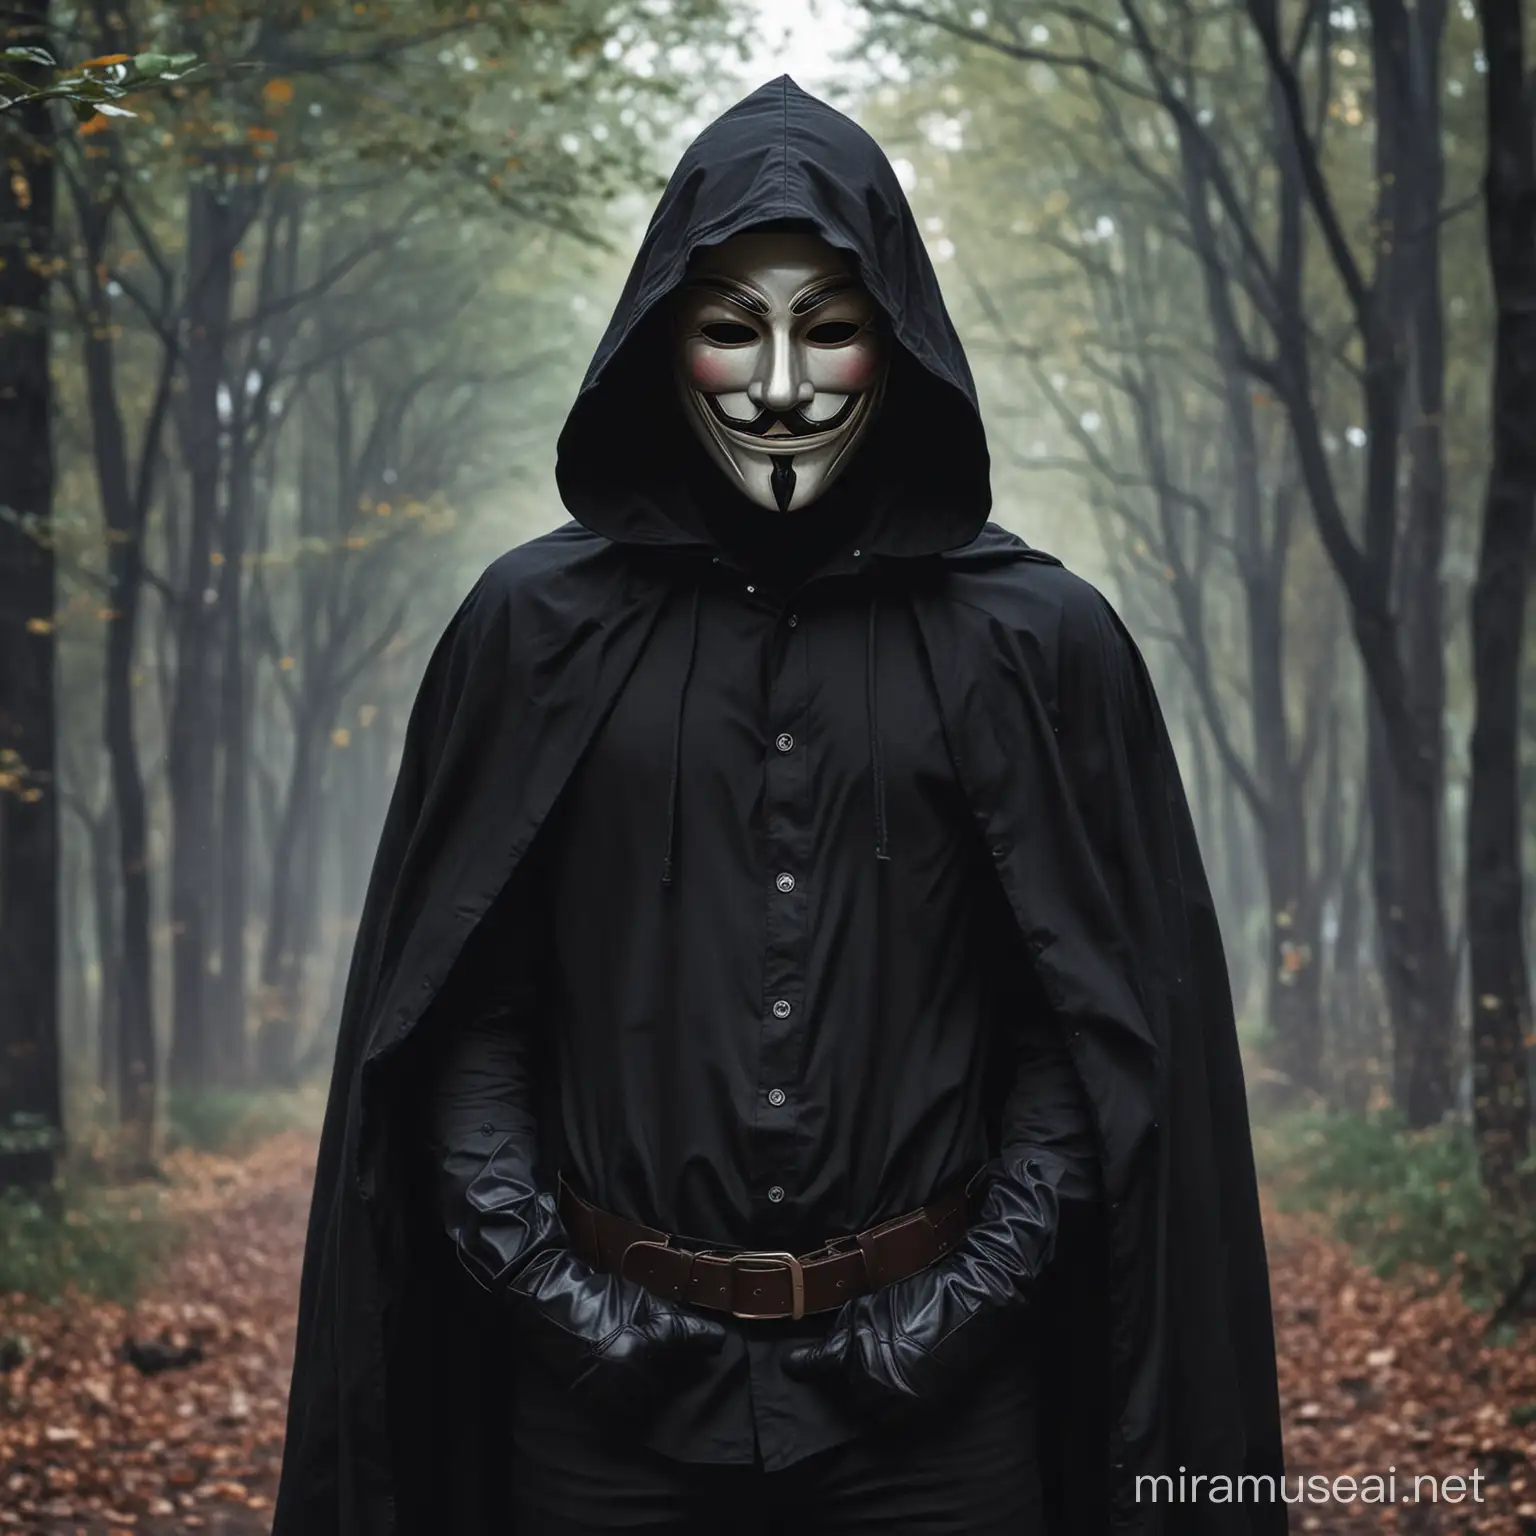 Mysterious Man in Guy Fawkes Mask with Hooded Cape